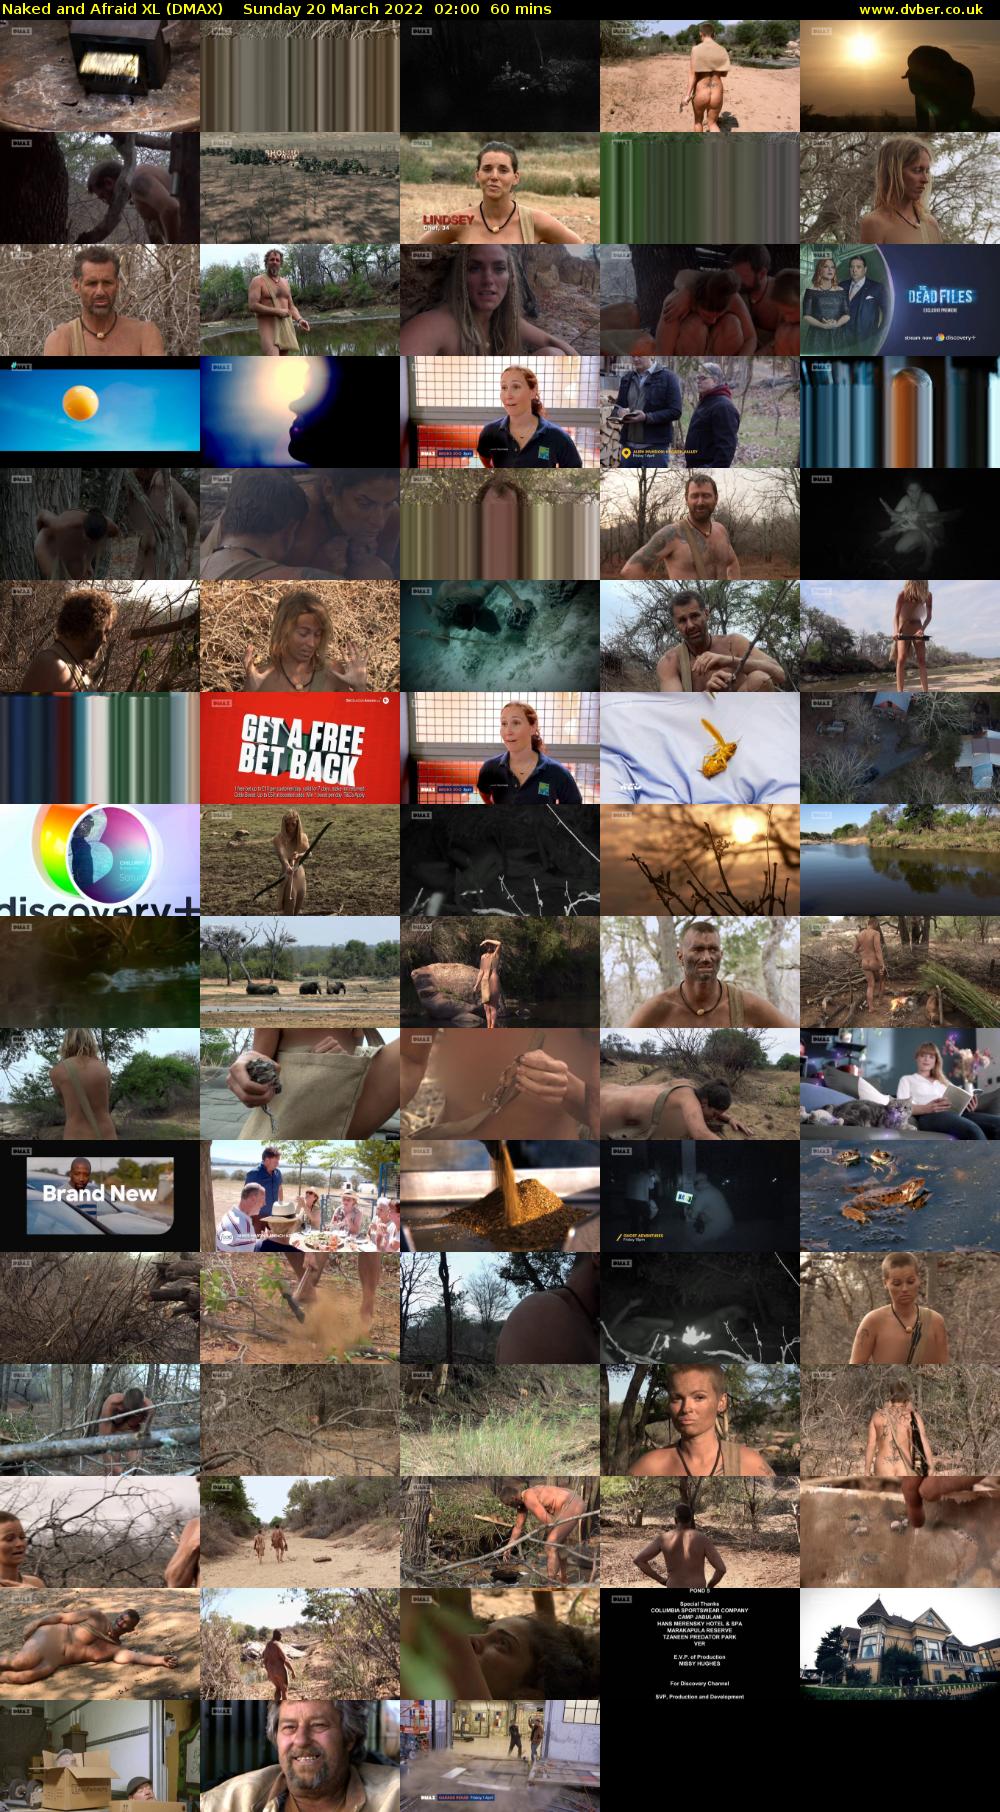 Naked and Afraid XL (DMAX) Sunday 20 March 2022 02:00 - 03:00